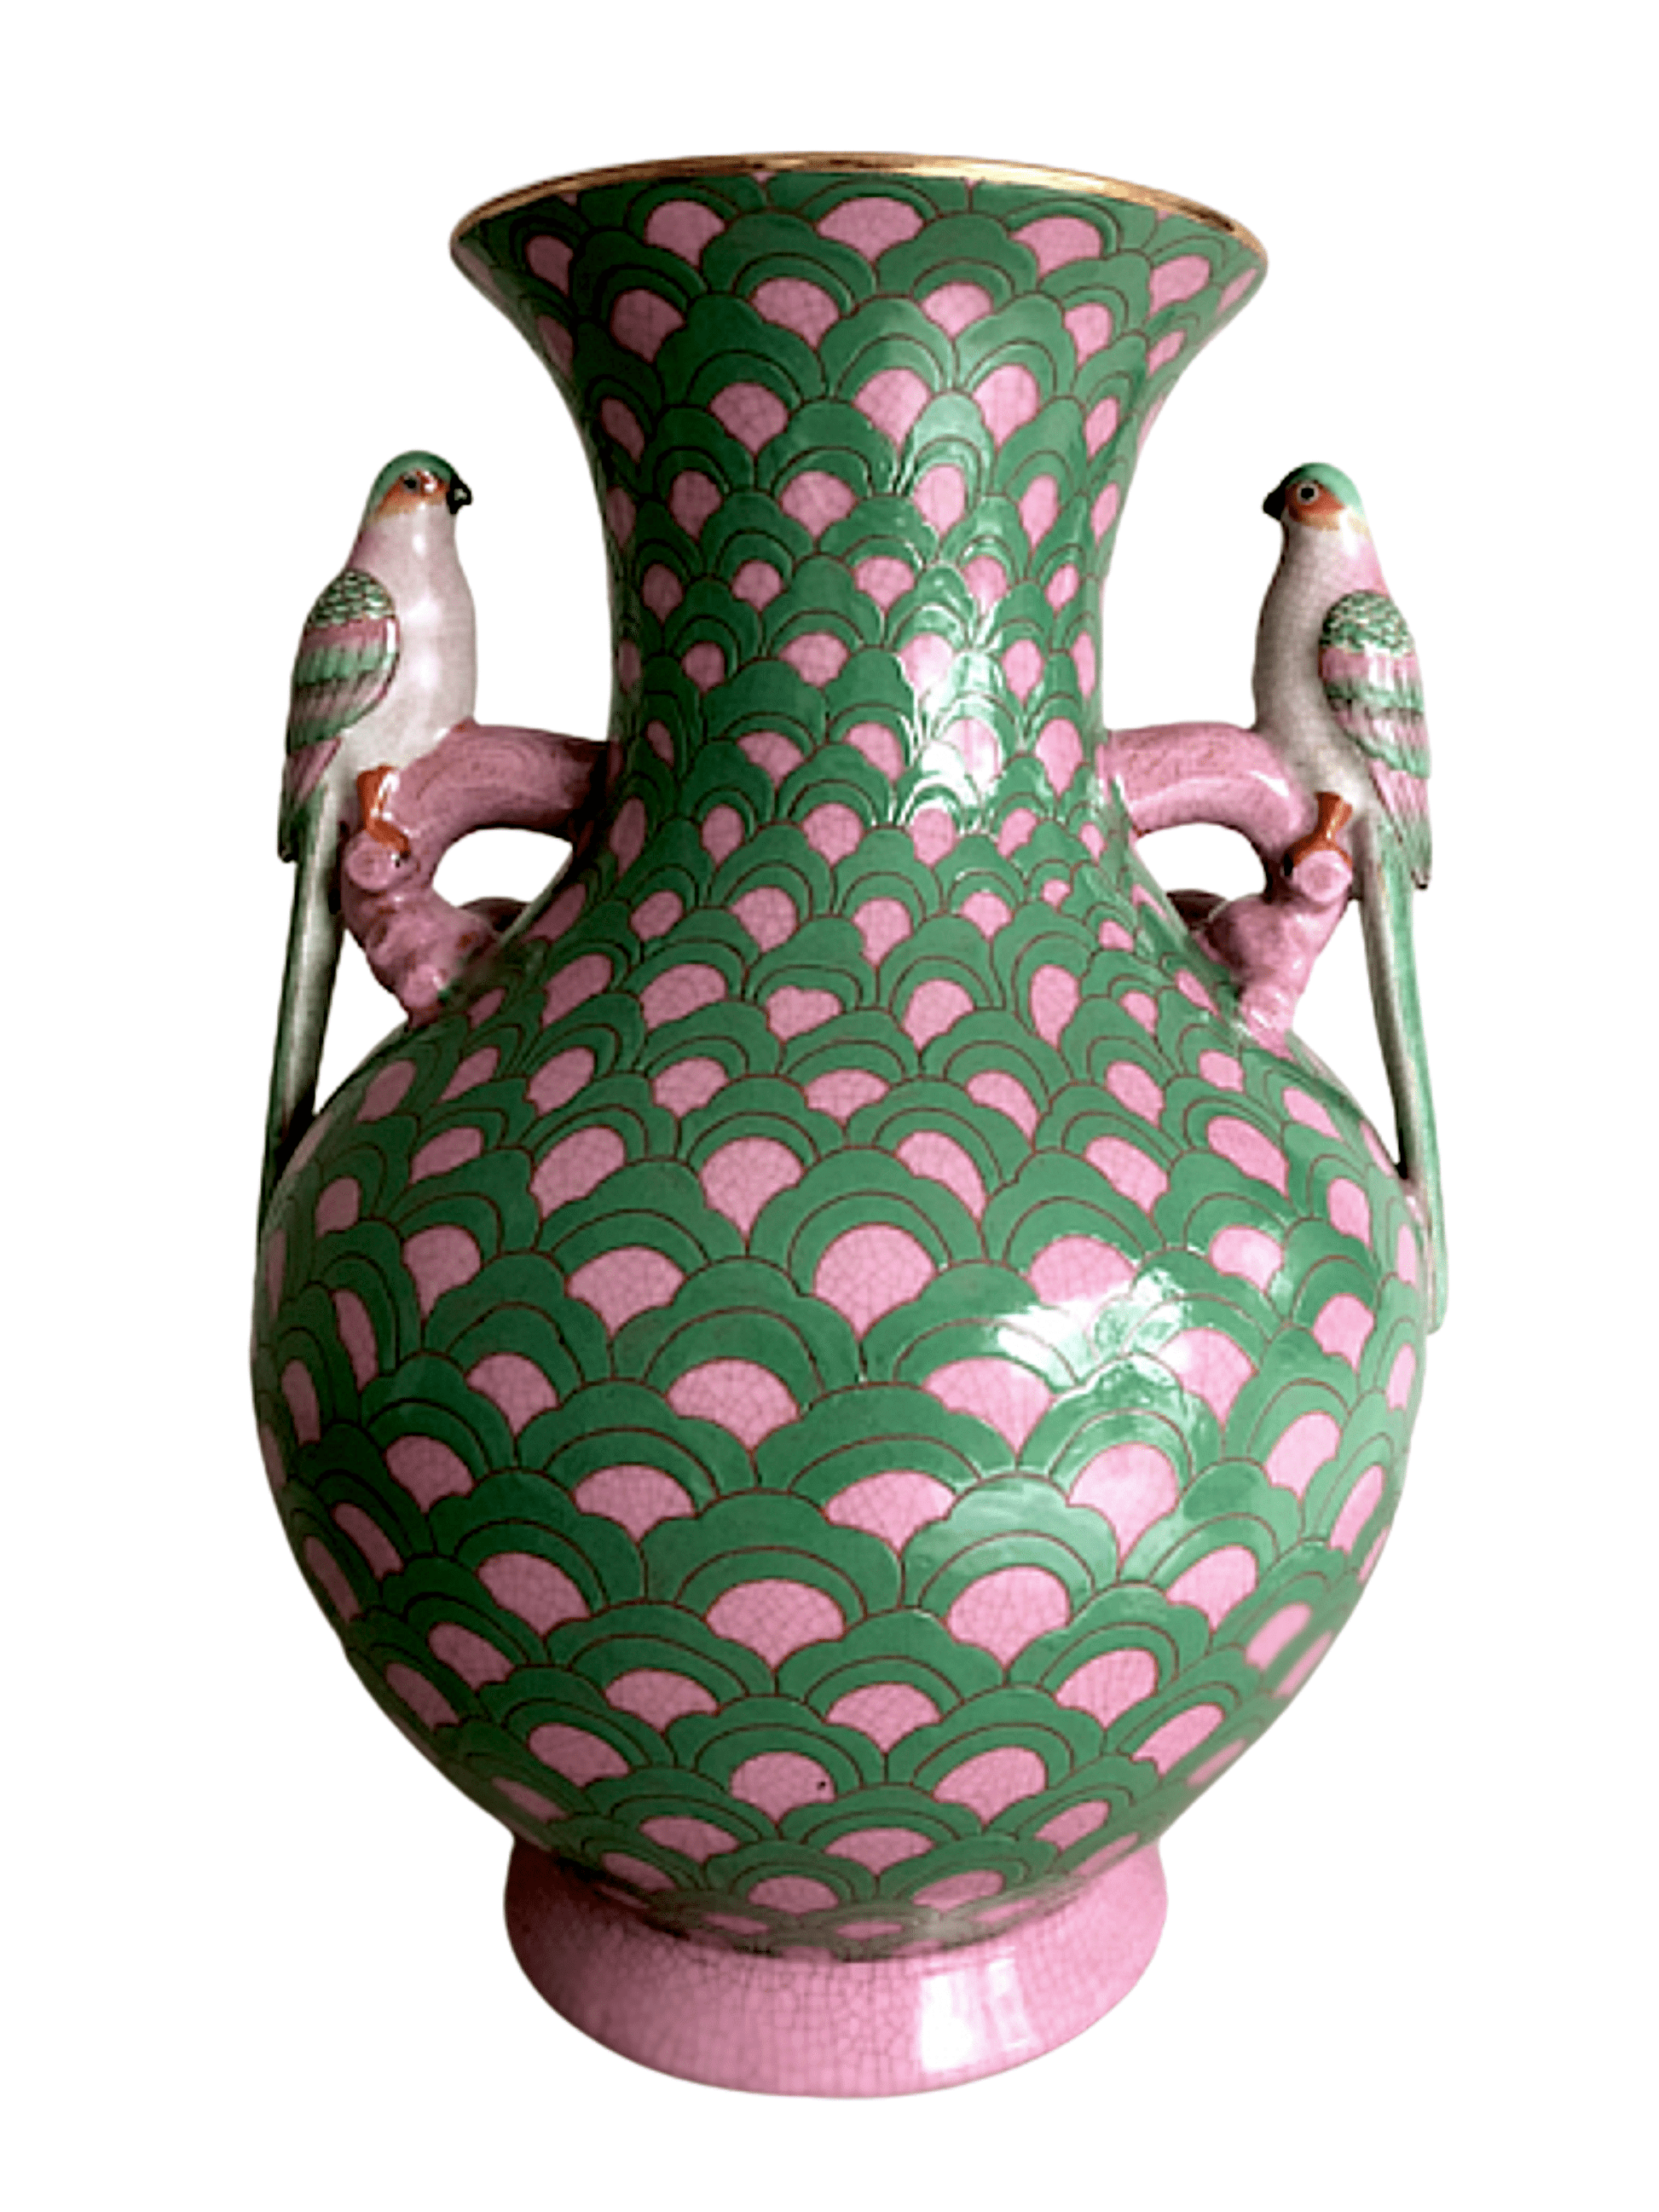 Isla Pink and Green Print Bird Sculpture Porcelain Vase by C.A.M